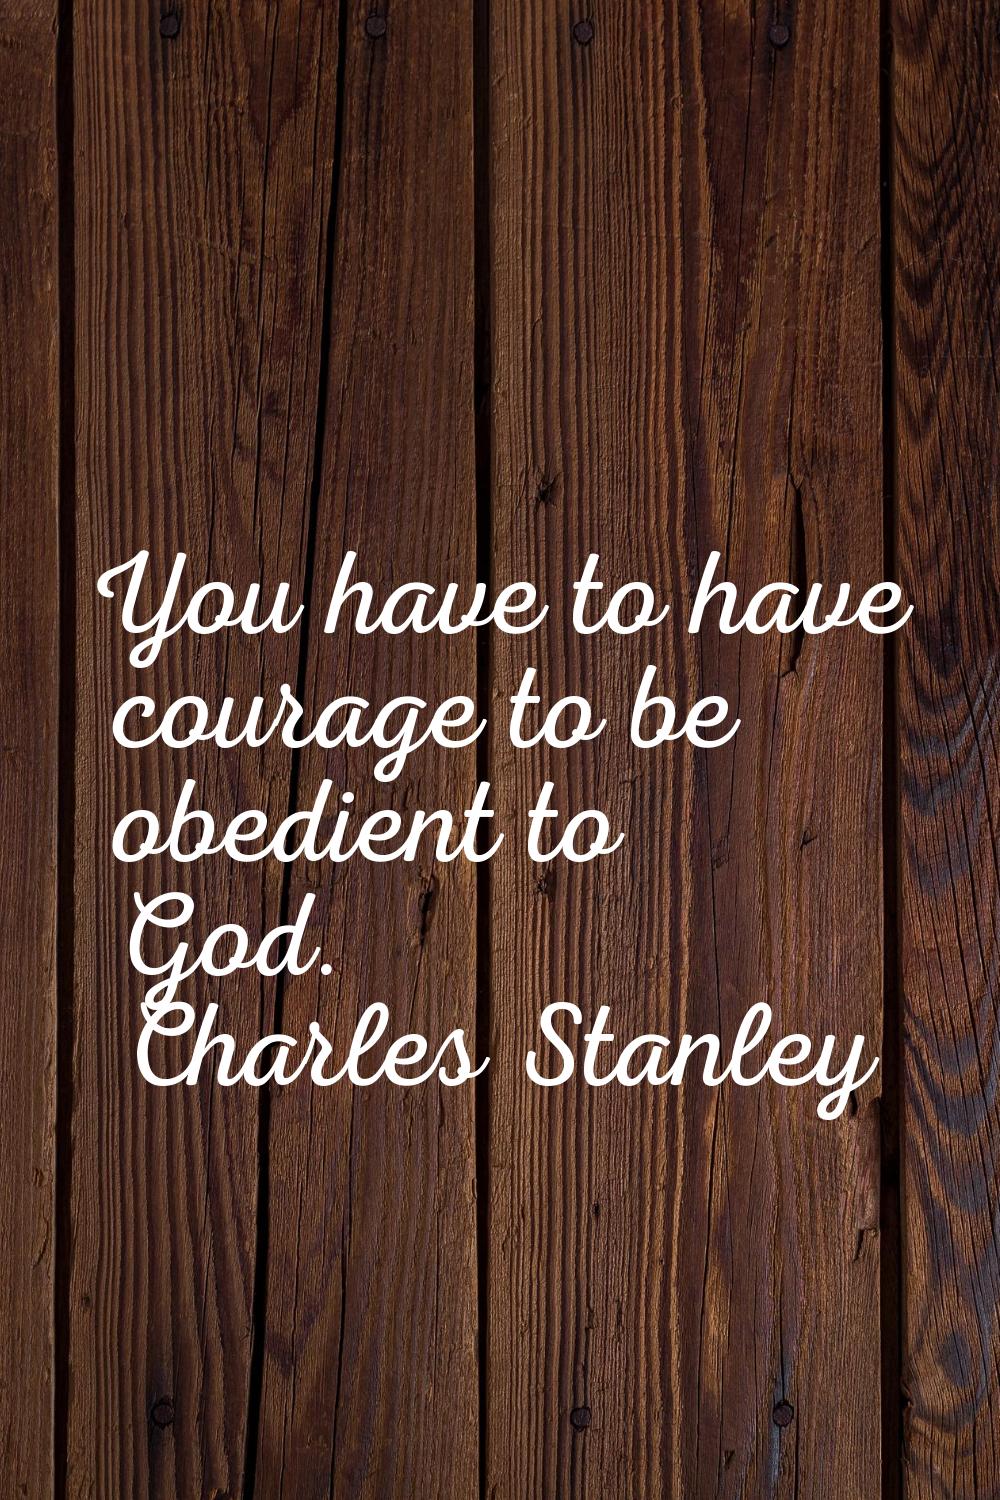 You have to have courage to be obedient to God.